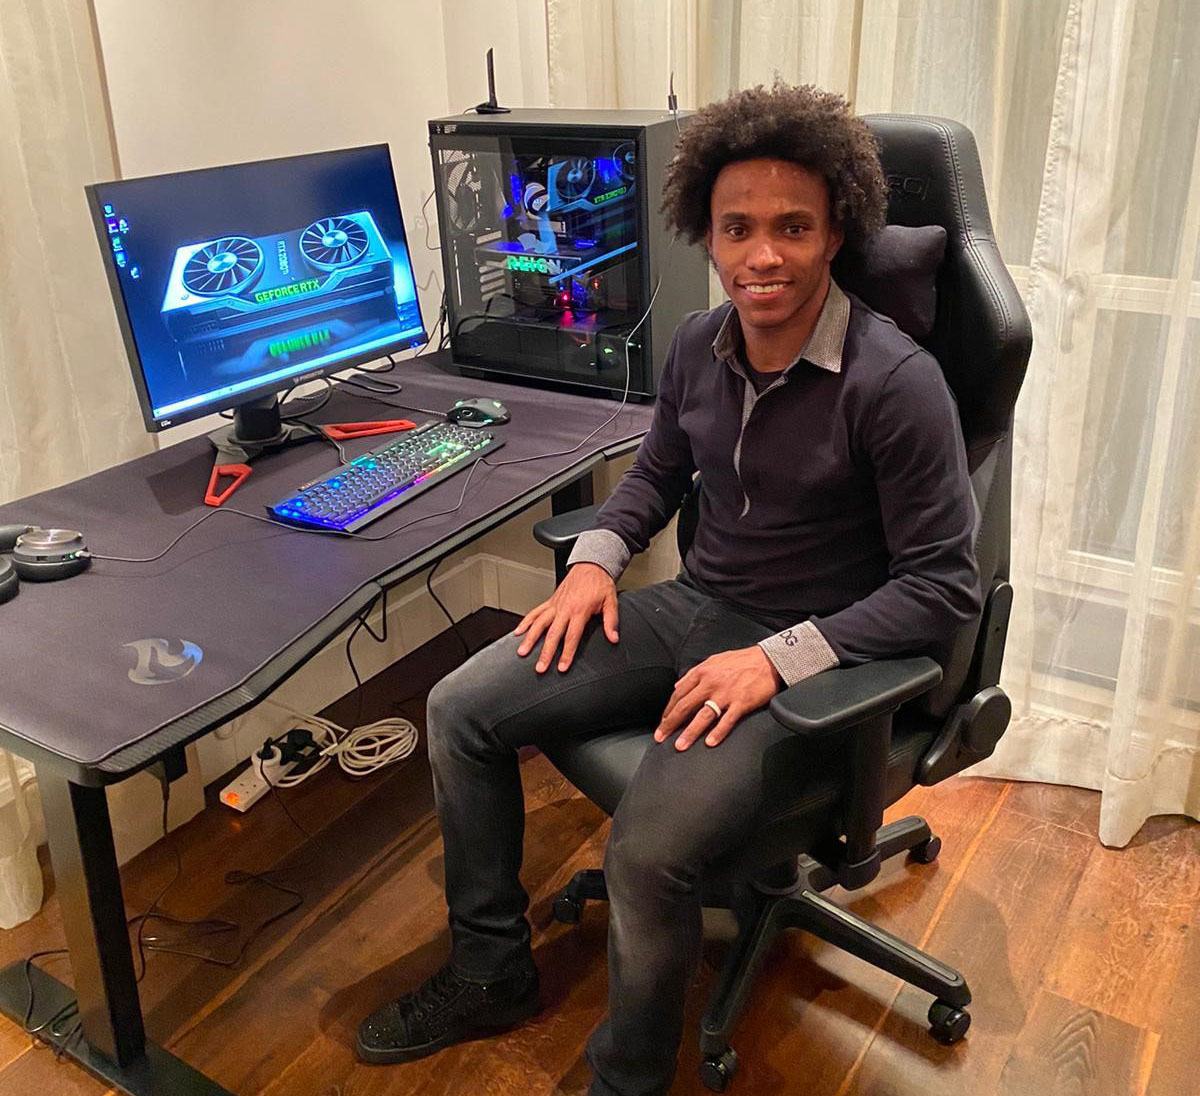 Chelsea Midfielder Willian with his Reign Gaming PC